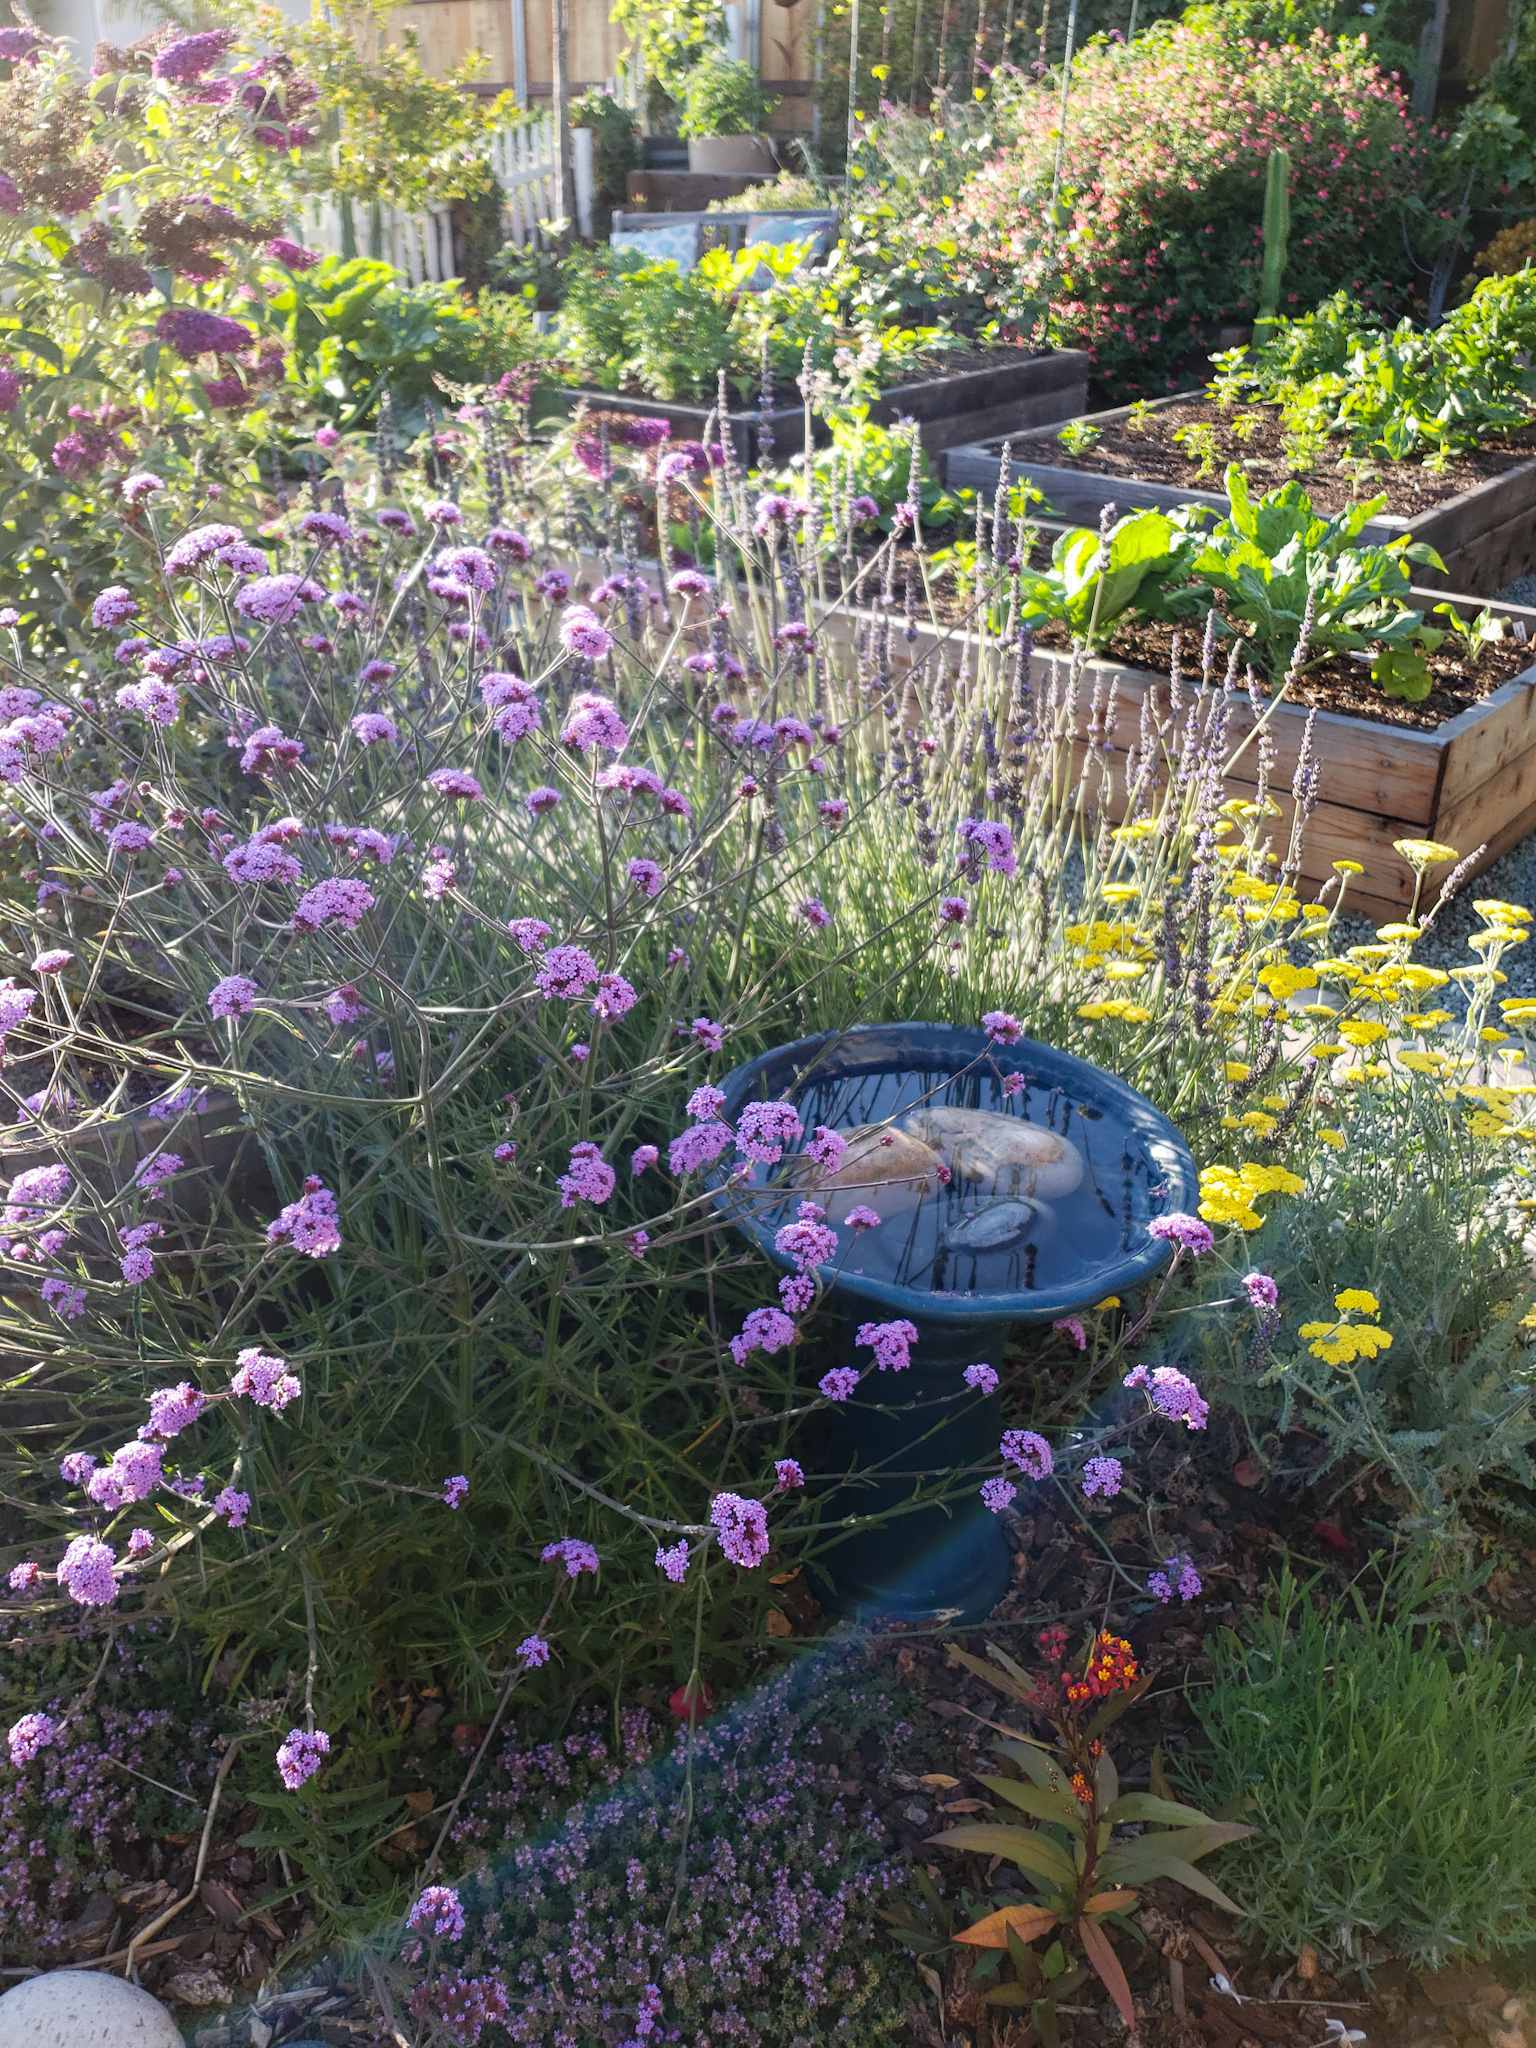 A bird bath is shown full to the brim with three larger rocks sitting in the middle of it. It is nestled amongst large verbena, lavender, and yarrow, with thyme and milkweed at the foot of the bath. Beyond the bird bath there are various wood raised garden beds full of vegetables with some larger perennials and cacti further in the background. 